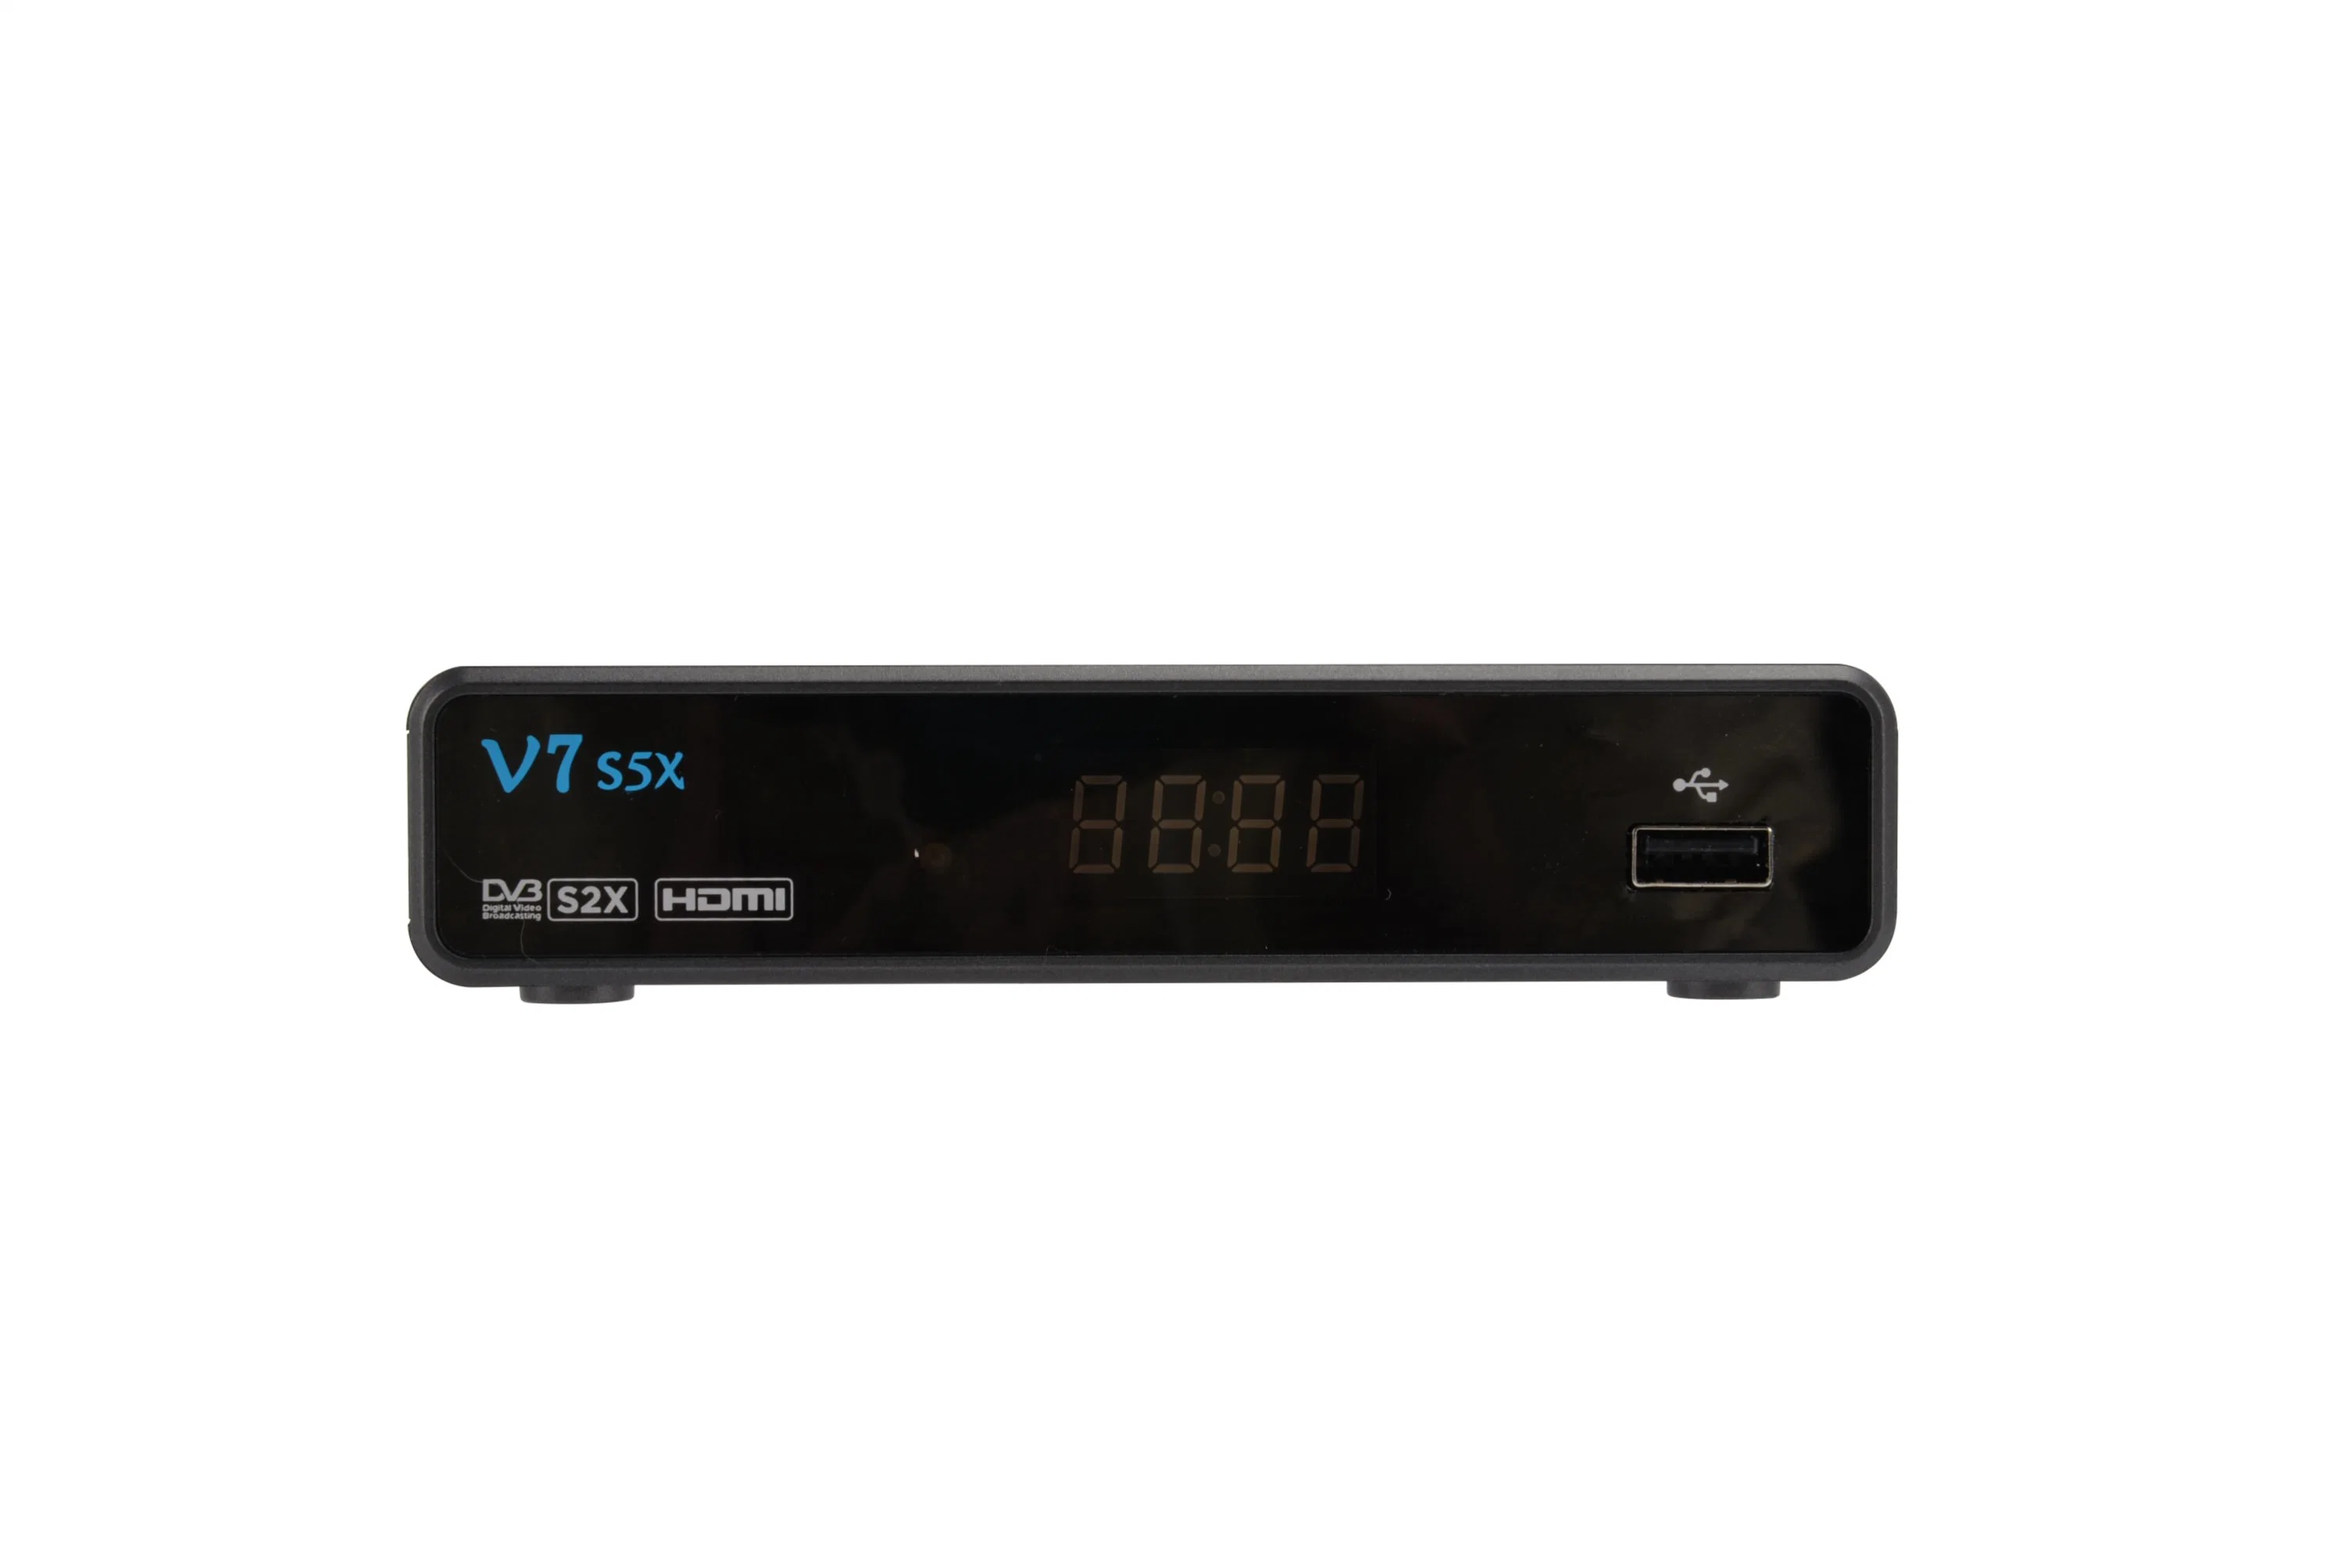 Gtmedia 2022 New Product V7 S5X DVB-S2X Satellite Receiver Box with Biss Auto-Roll